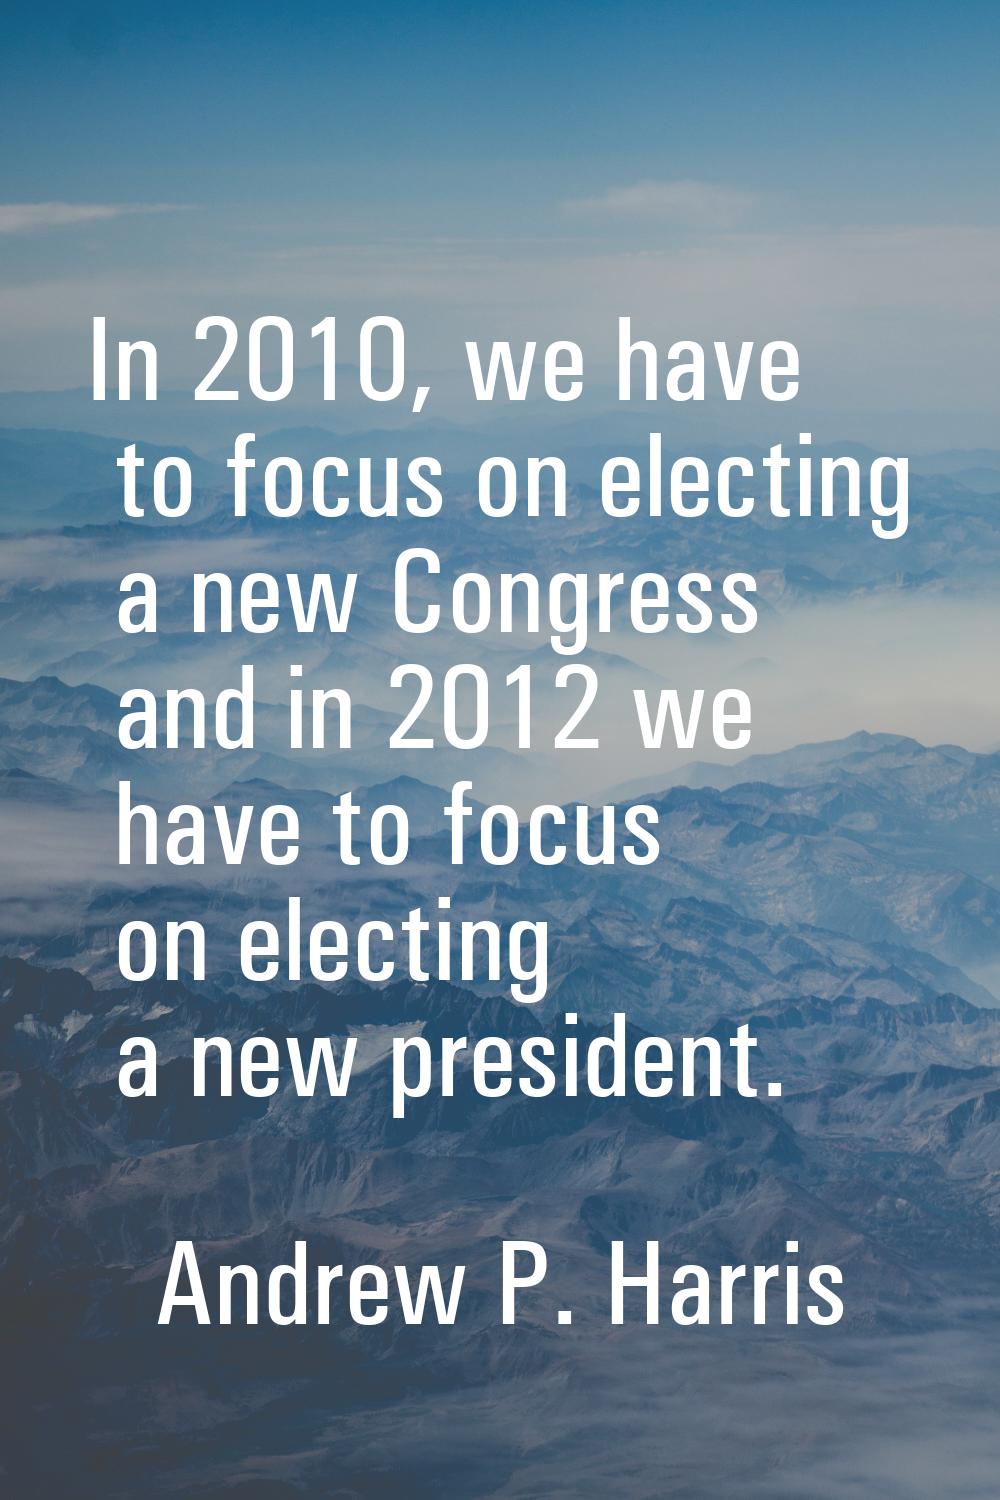 In 2010, we have to focus on electing a new Congress and in 2012 we have to focus on electing a new